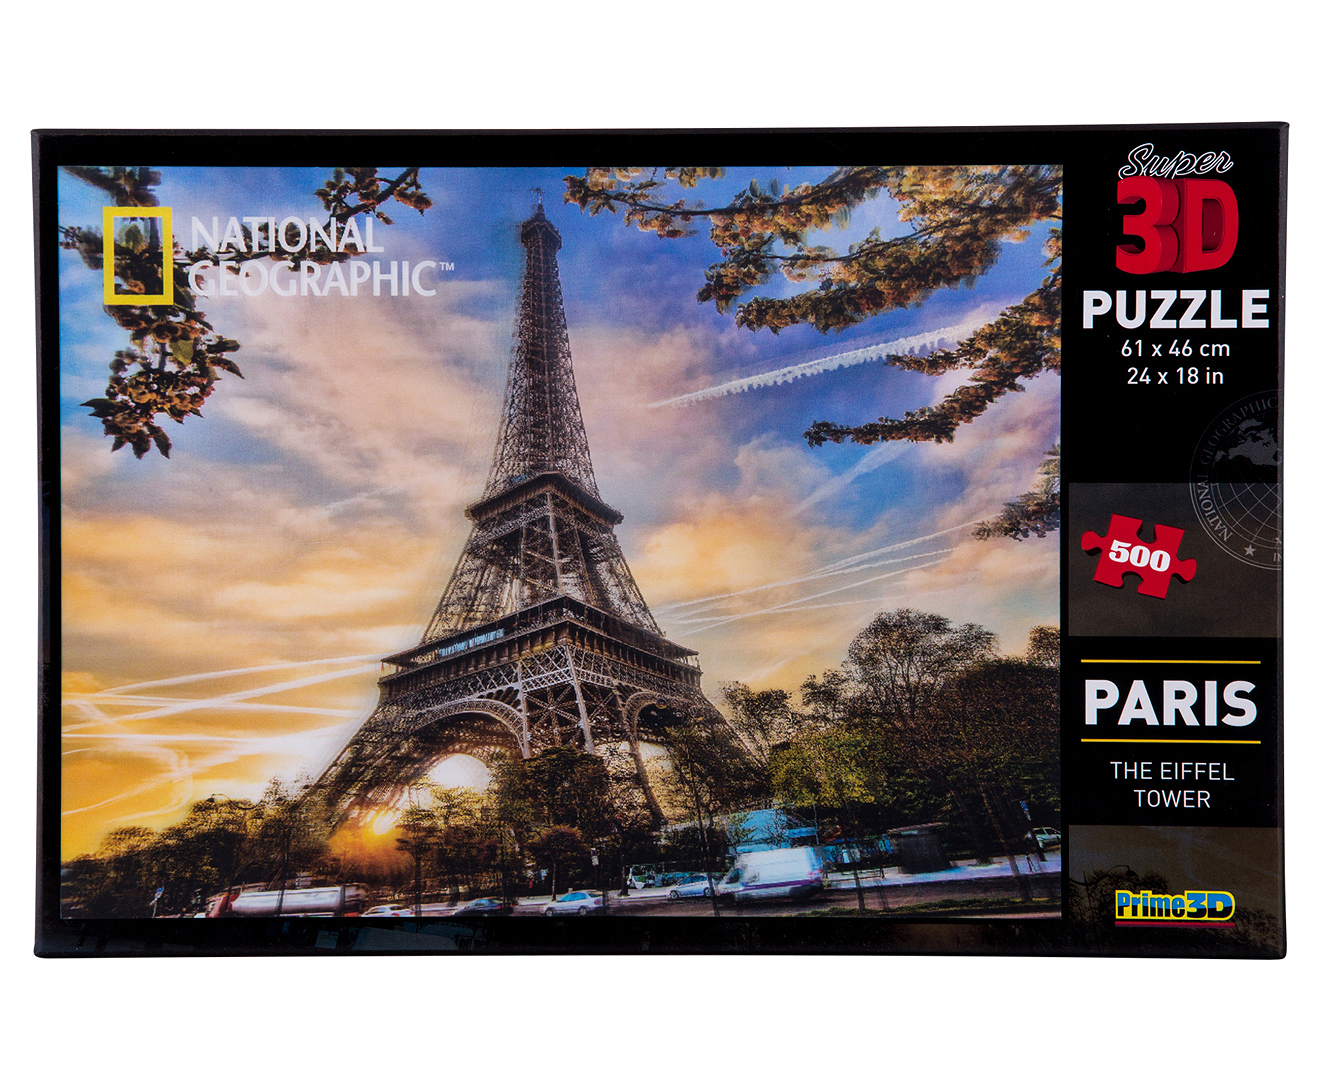 jigsaw puzzles online free national geographic